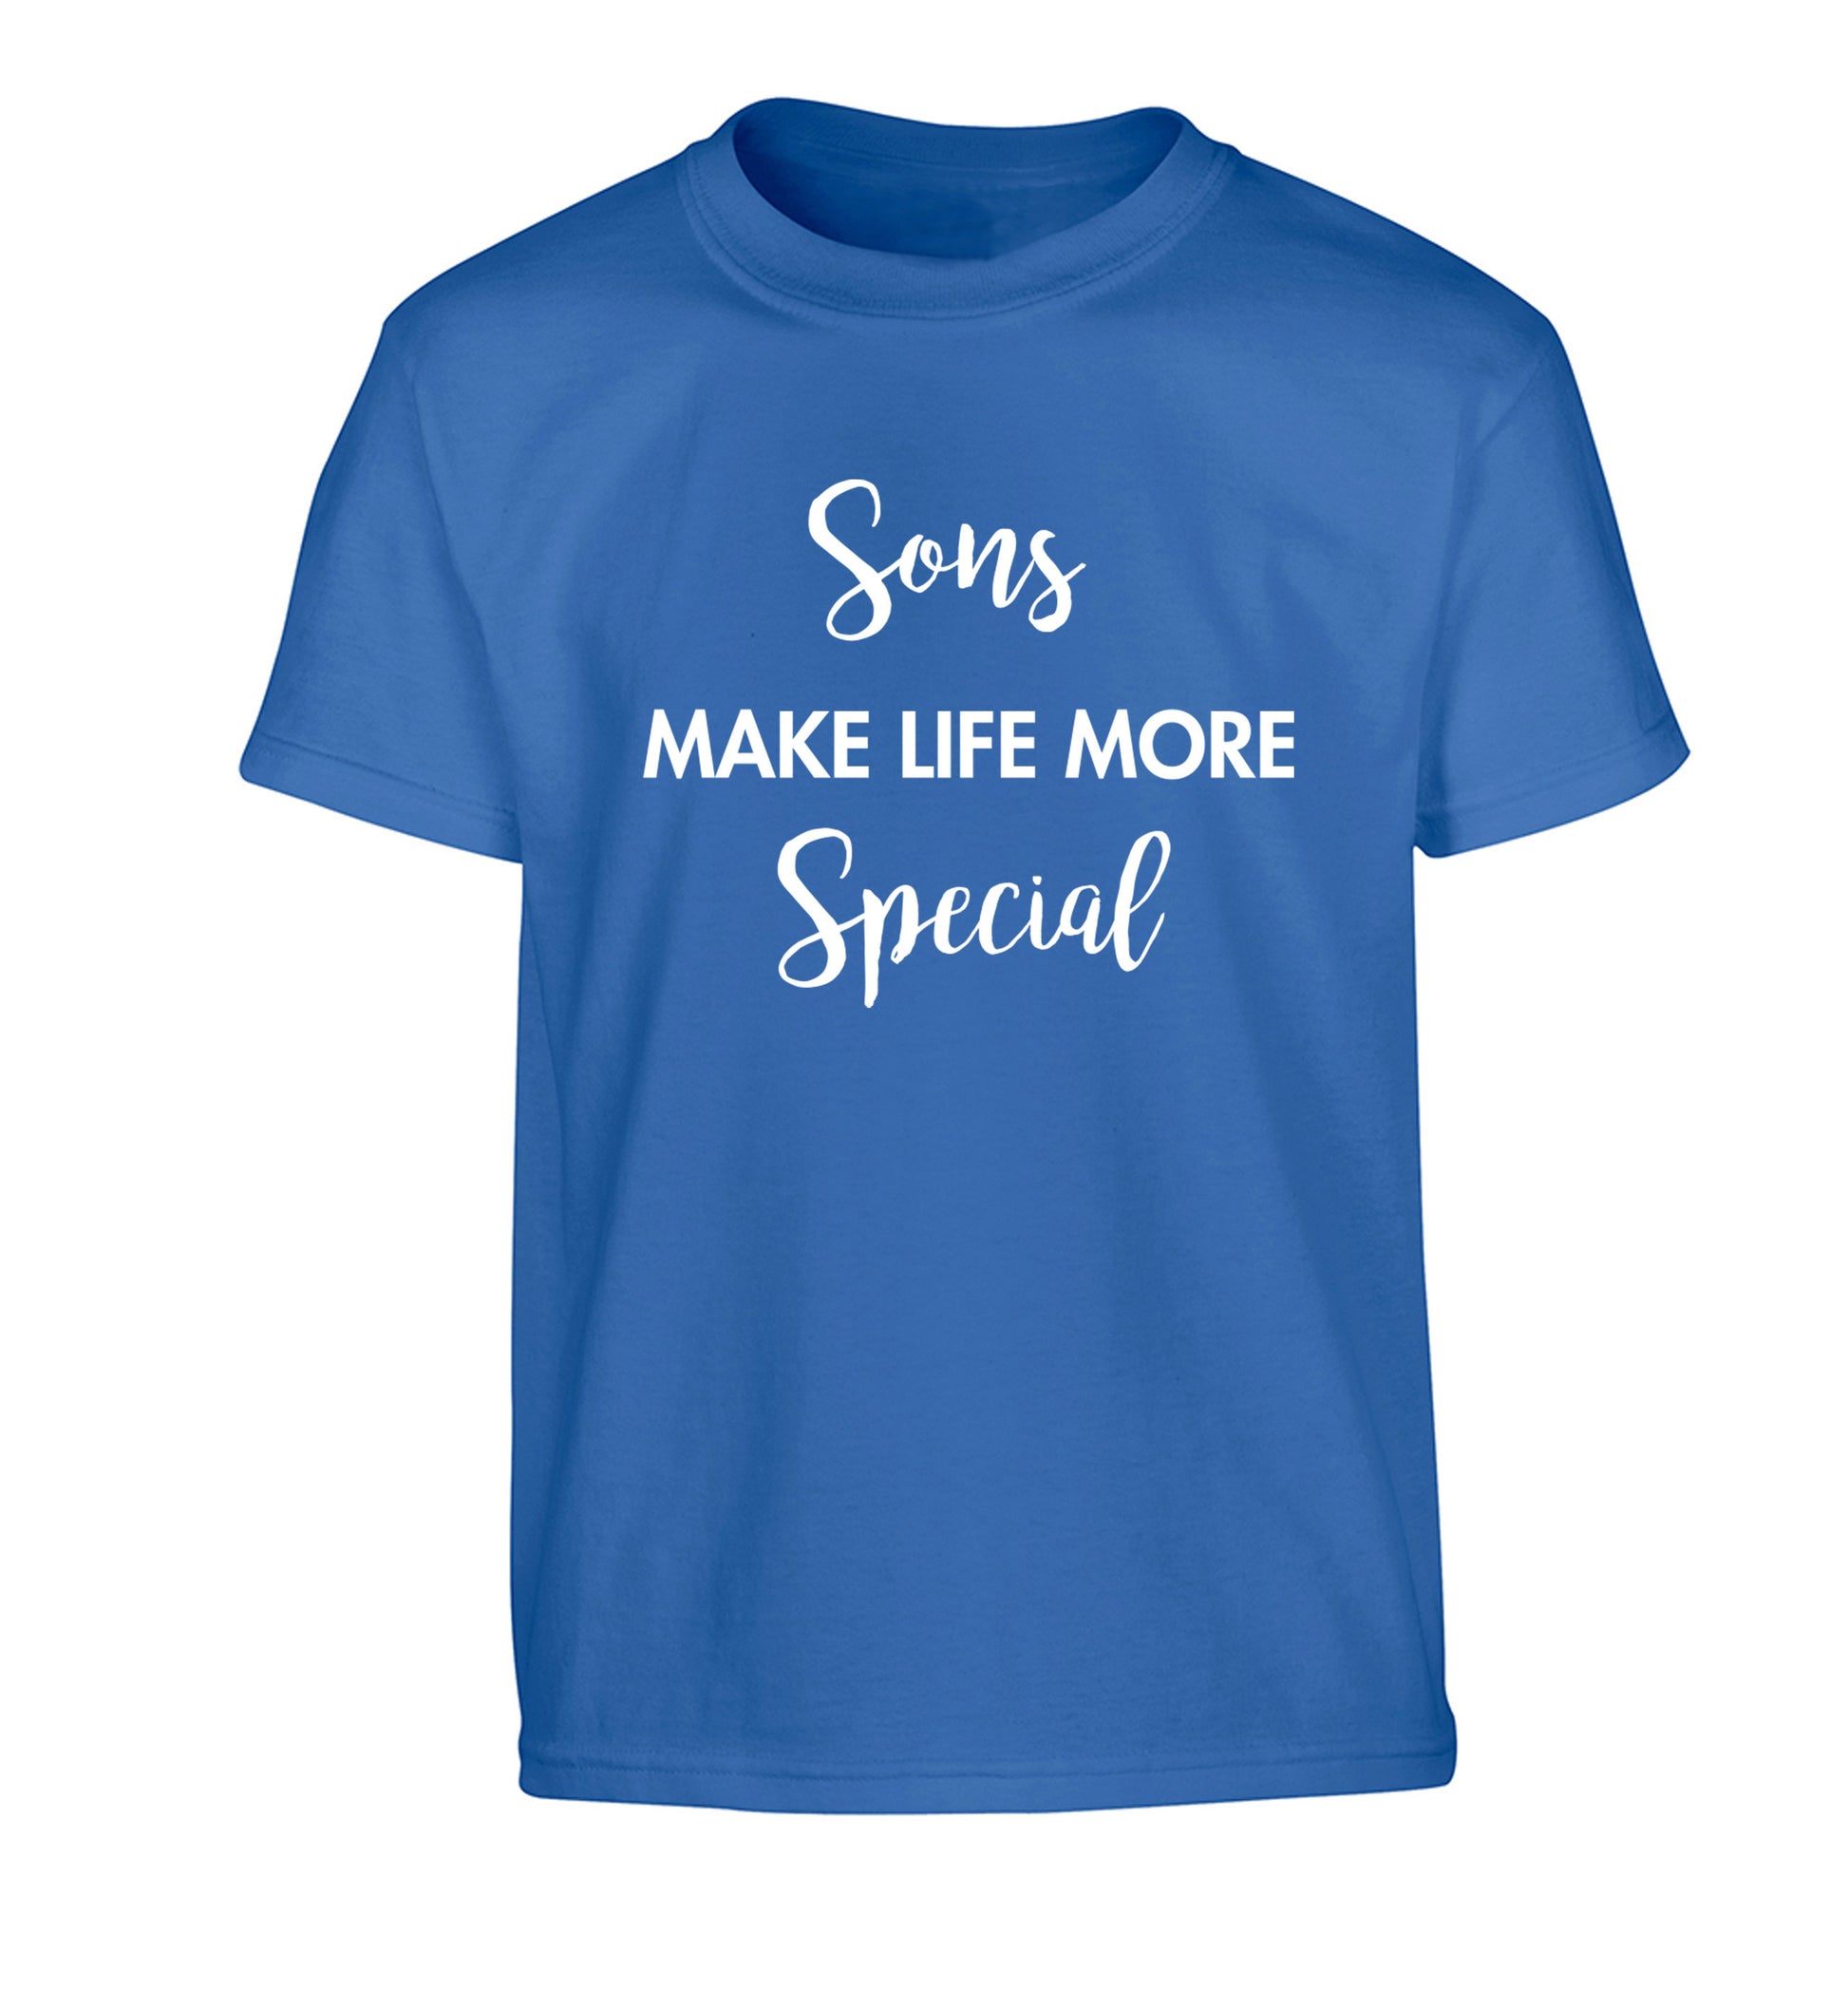 Daughters make life more special Children's blue Tshirt 12-14 Years